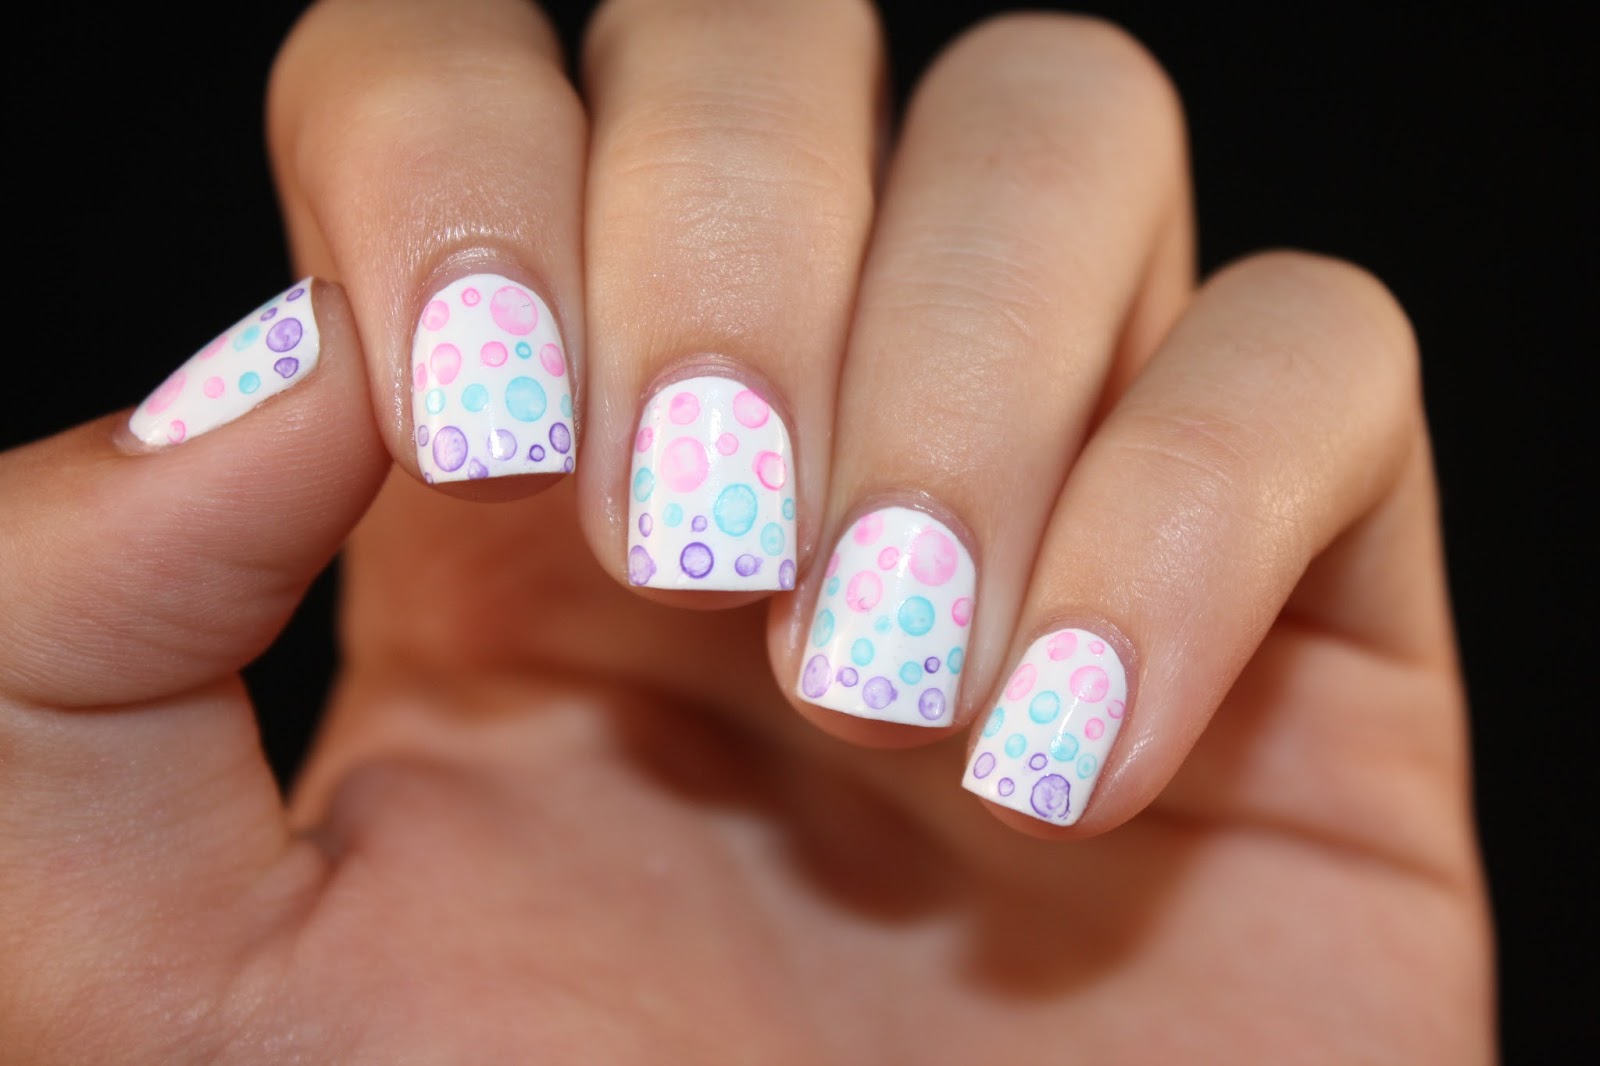 2. New Nail Trends: Bubble Nails - wide 2